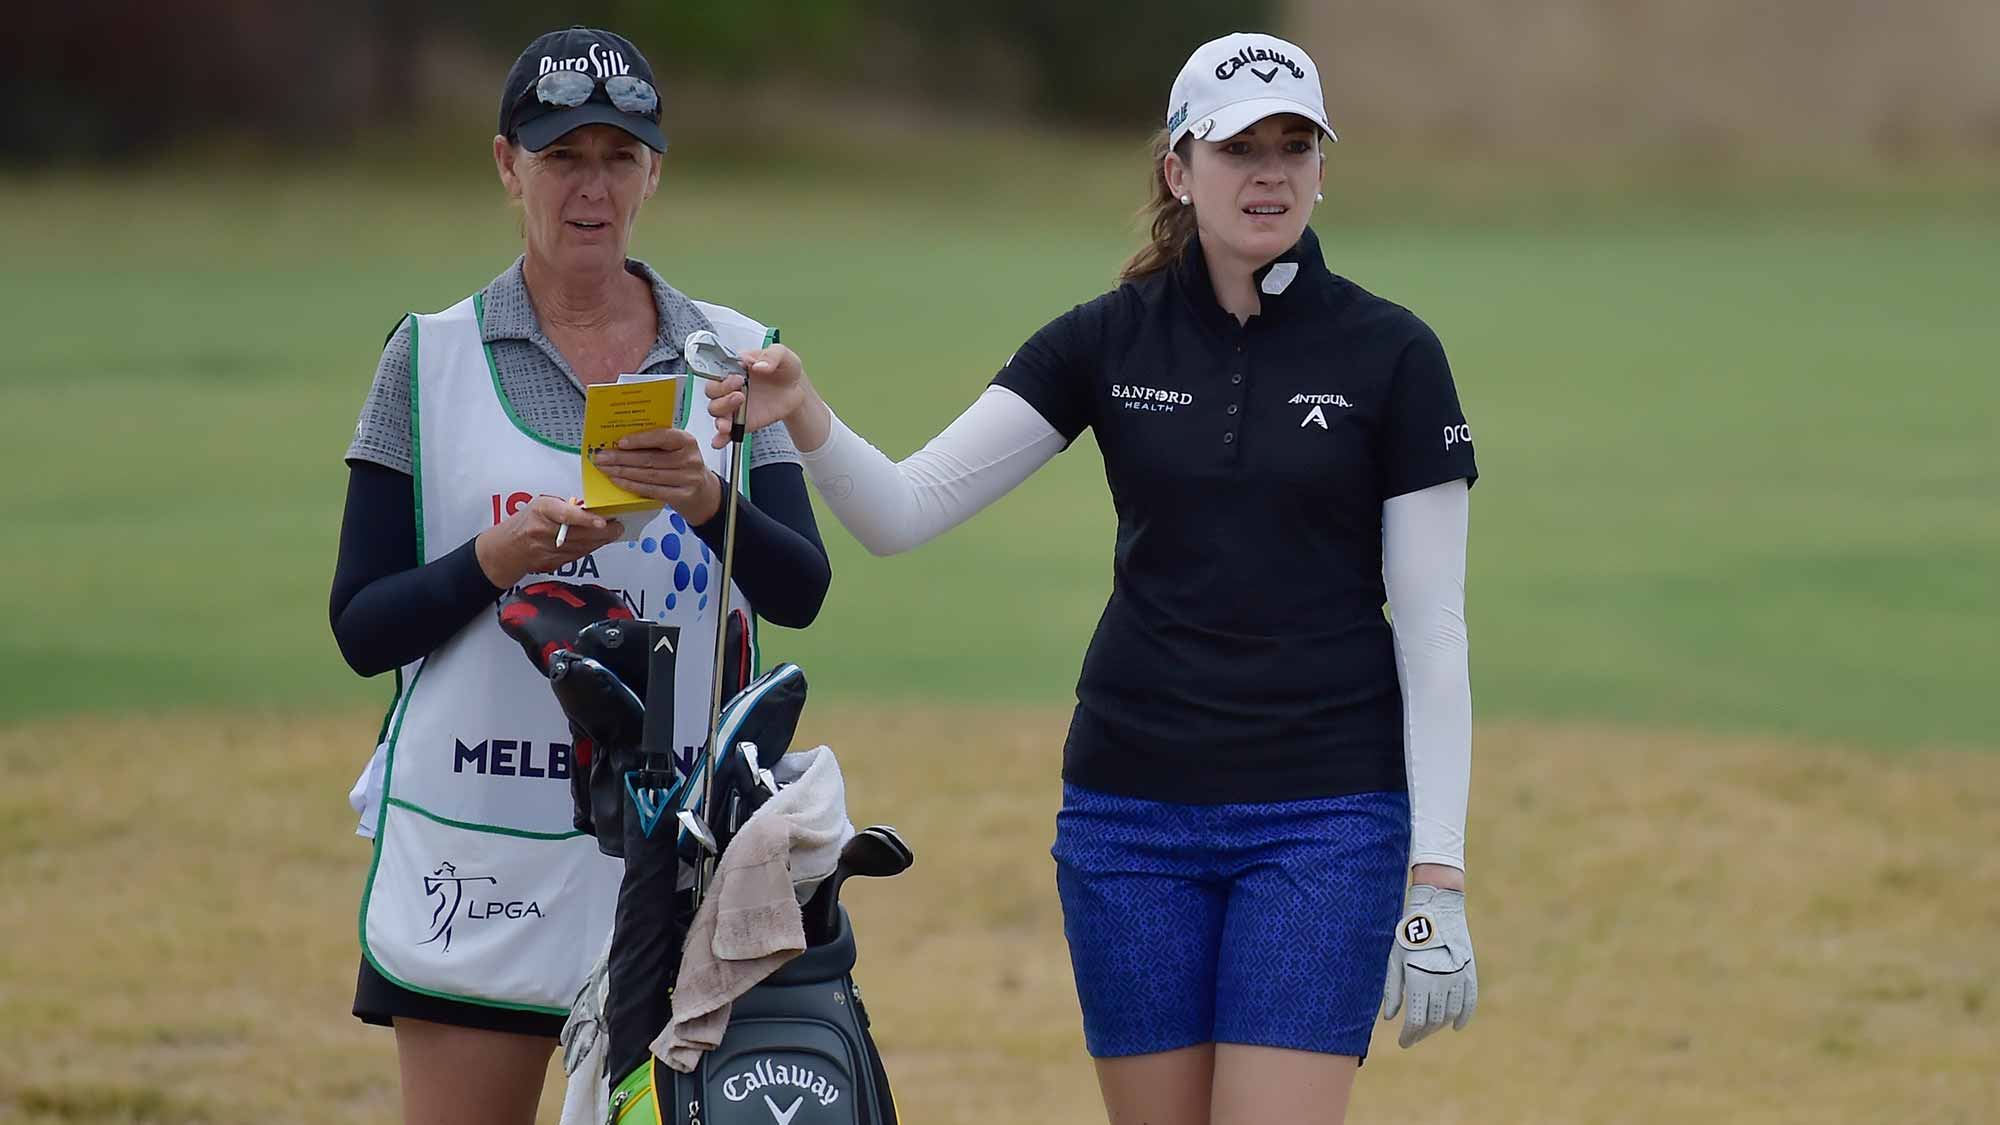 Kim Kaufman stands with her caddie during the second round of the ISPS Handa Vic Open in Geelong, Australia on February 8, 2019